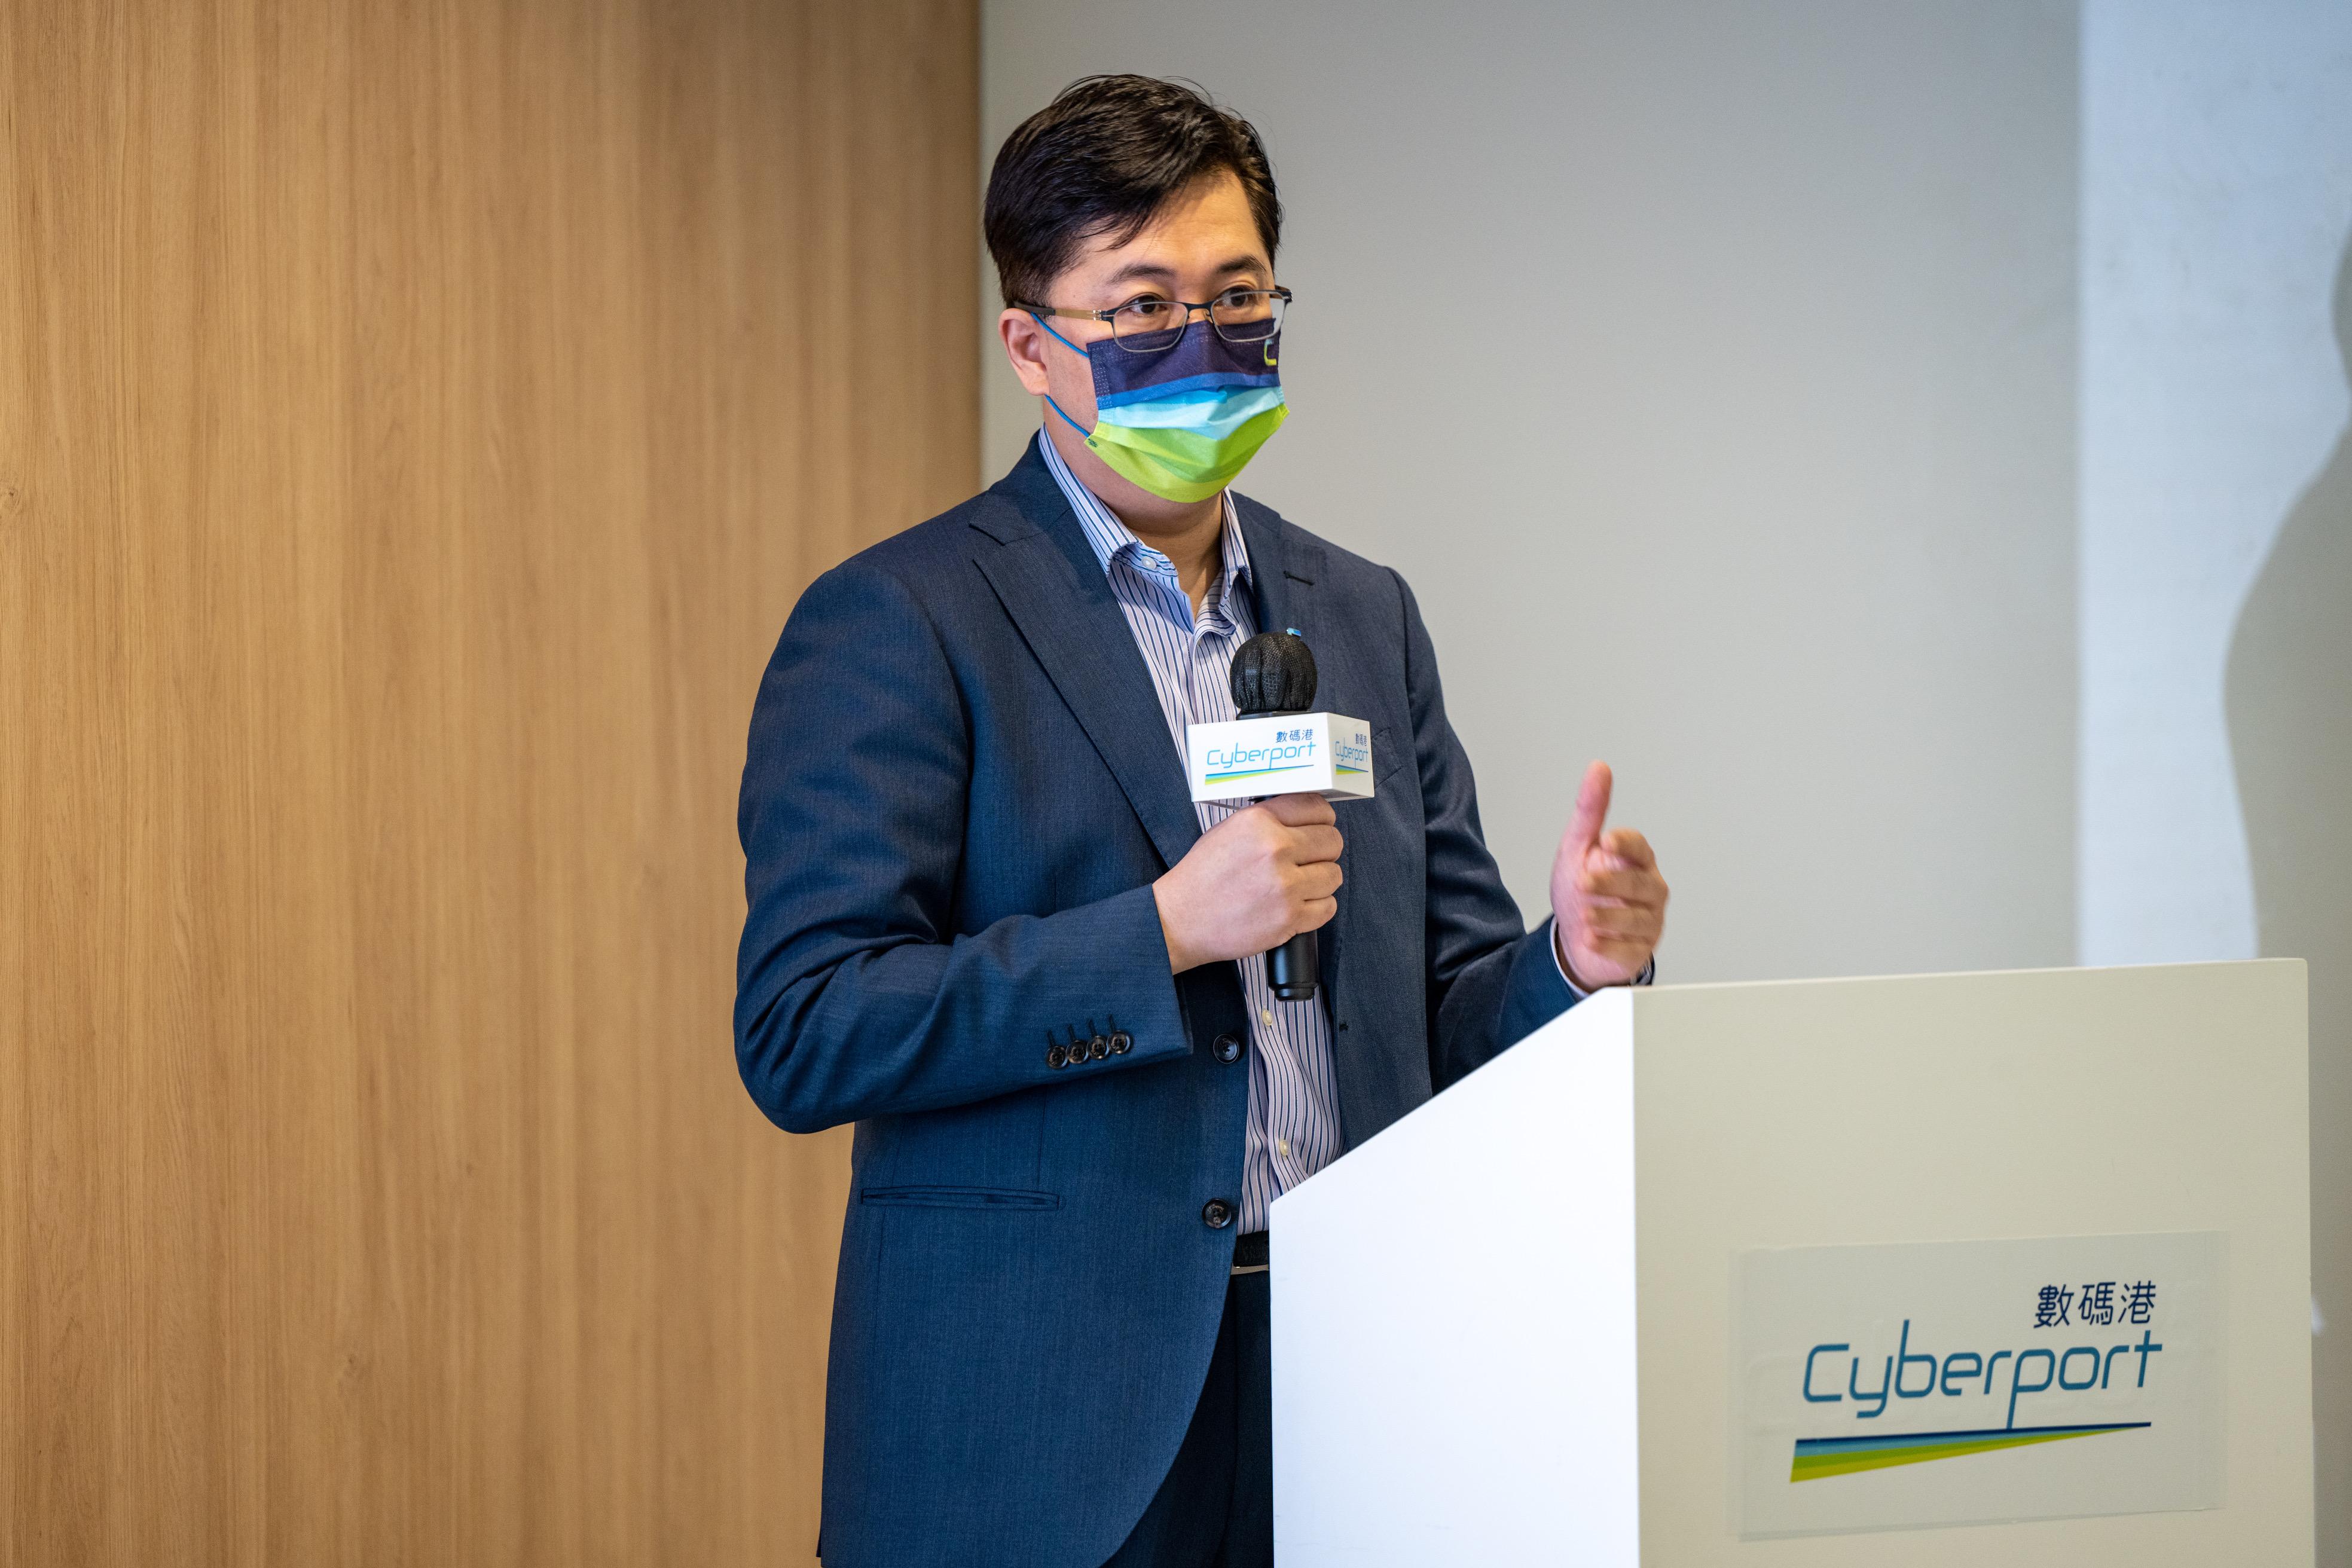 The Hong Kong Monetary Authority and Cyberport, supported by Deloitte, co-organised today (July 21) the second Anti-Money Laundering Regtech Lab (AMLab). Photo shows the Chief Public Mission Officer of Cyberport, Mr Eric Chan, delivering remarks at the second AMLab session.